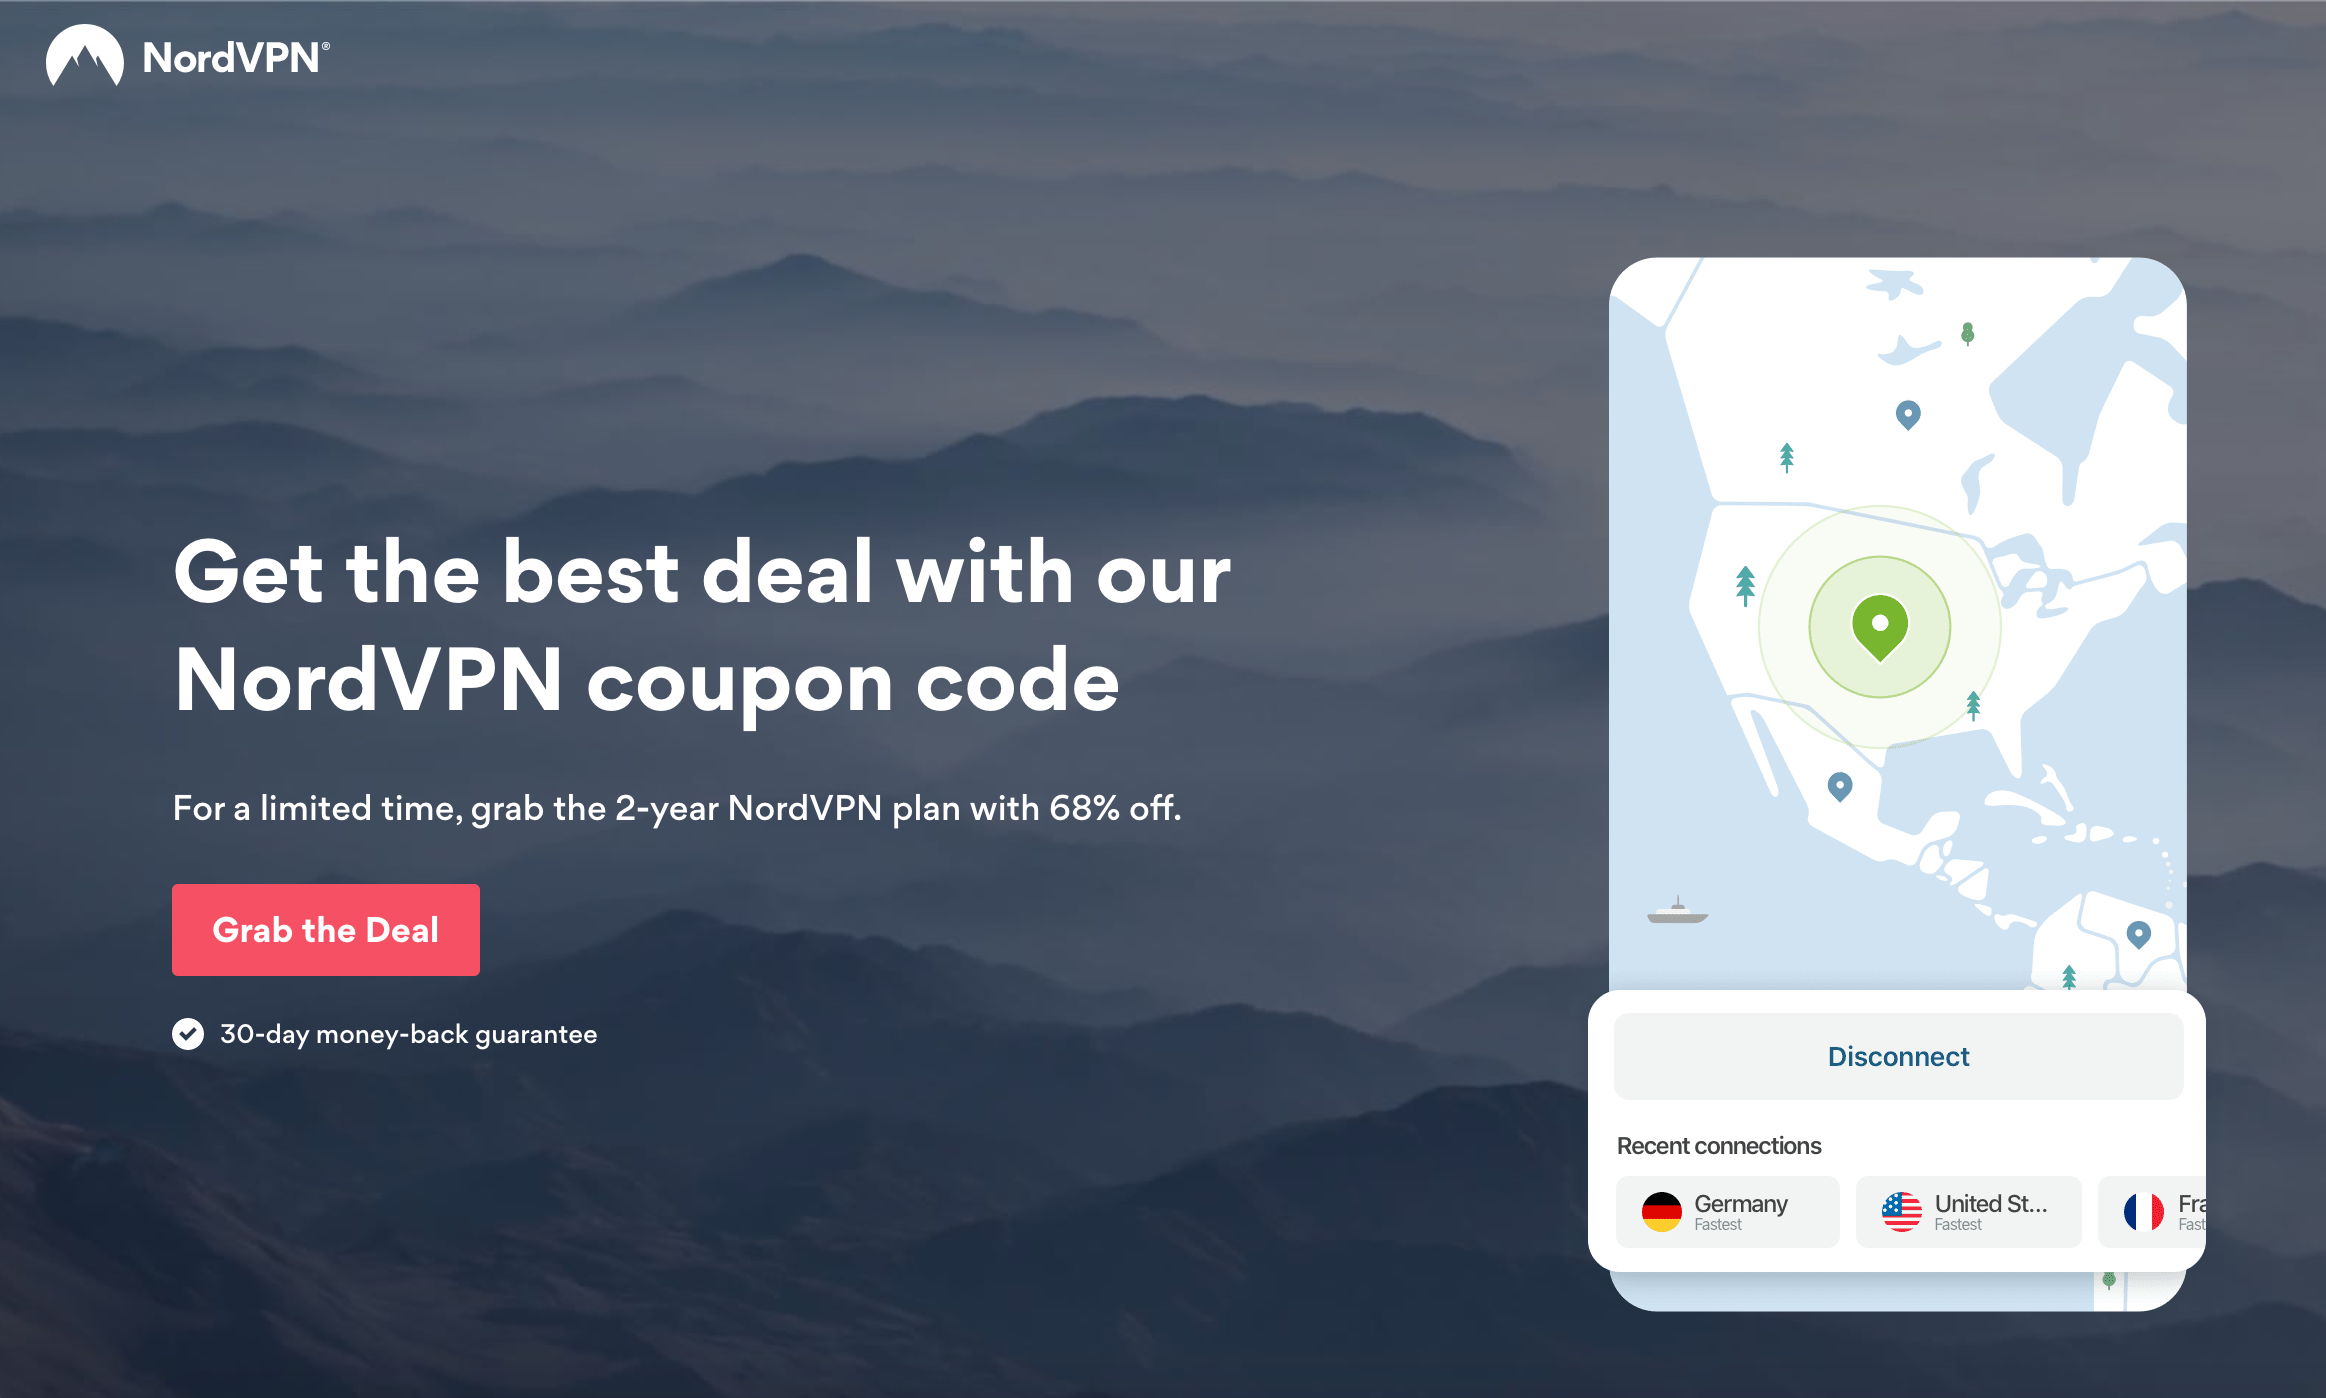 NordVPN is an easy way to increase your online privacy